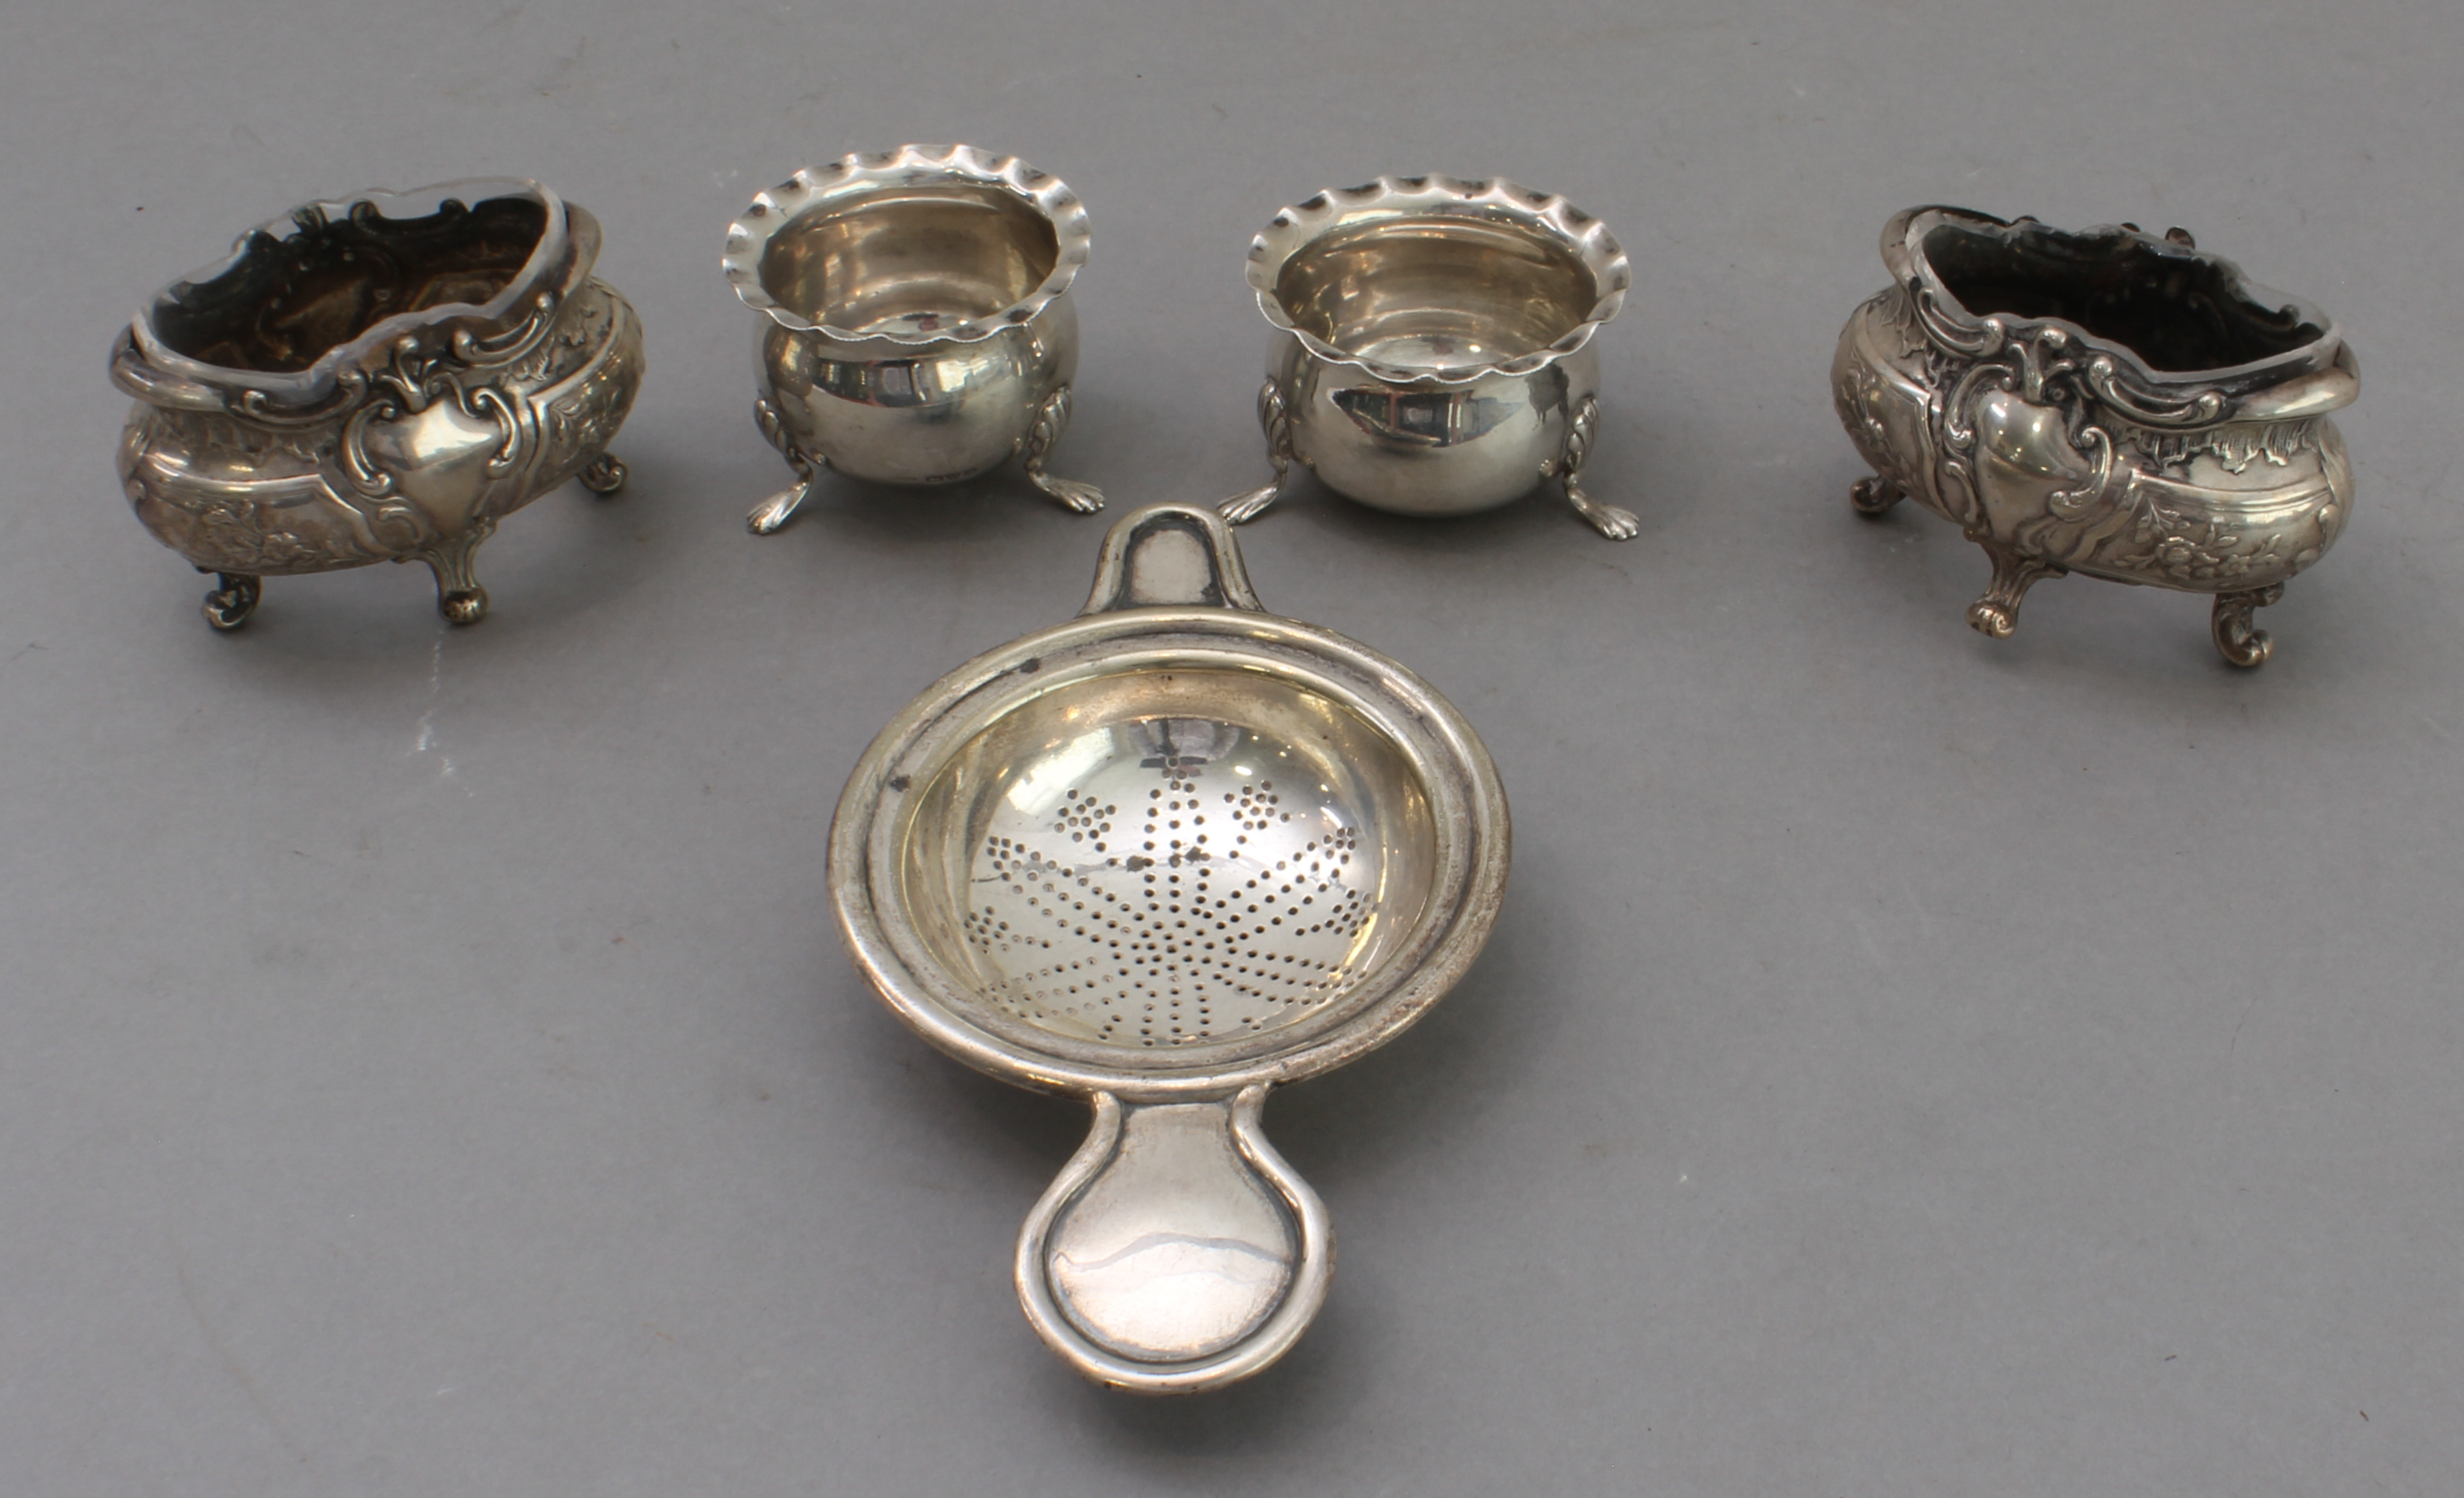 An assortment of silver comprising: 1. a continental silver strainer; 2. a pair of cauldron-shaped